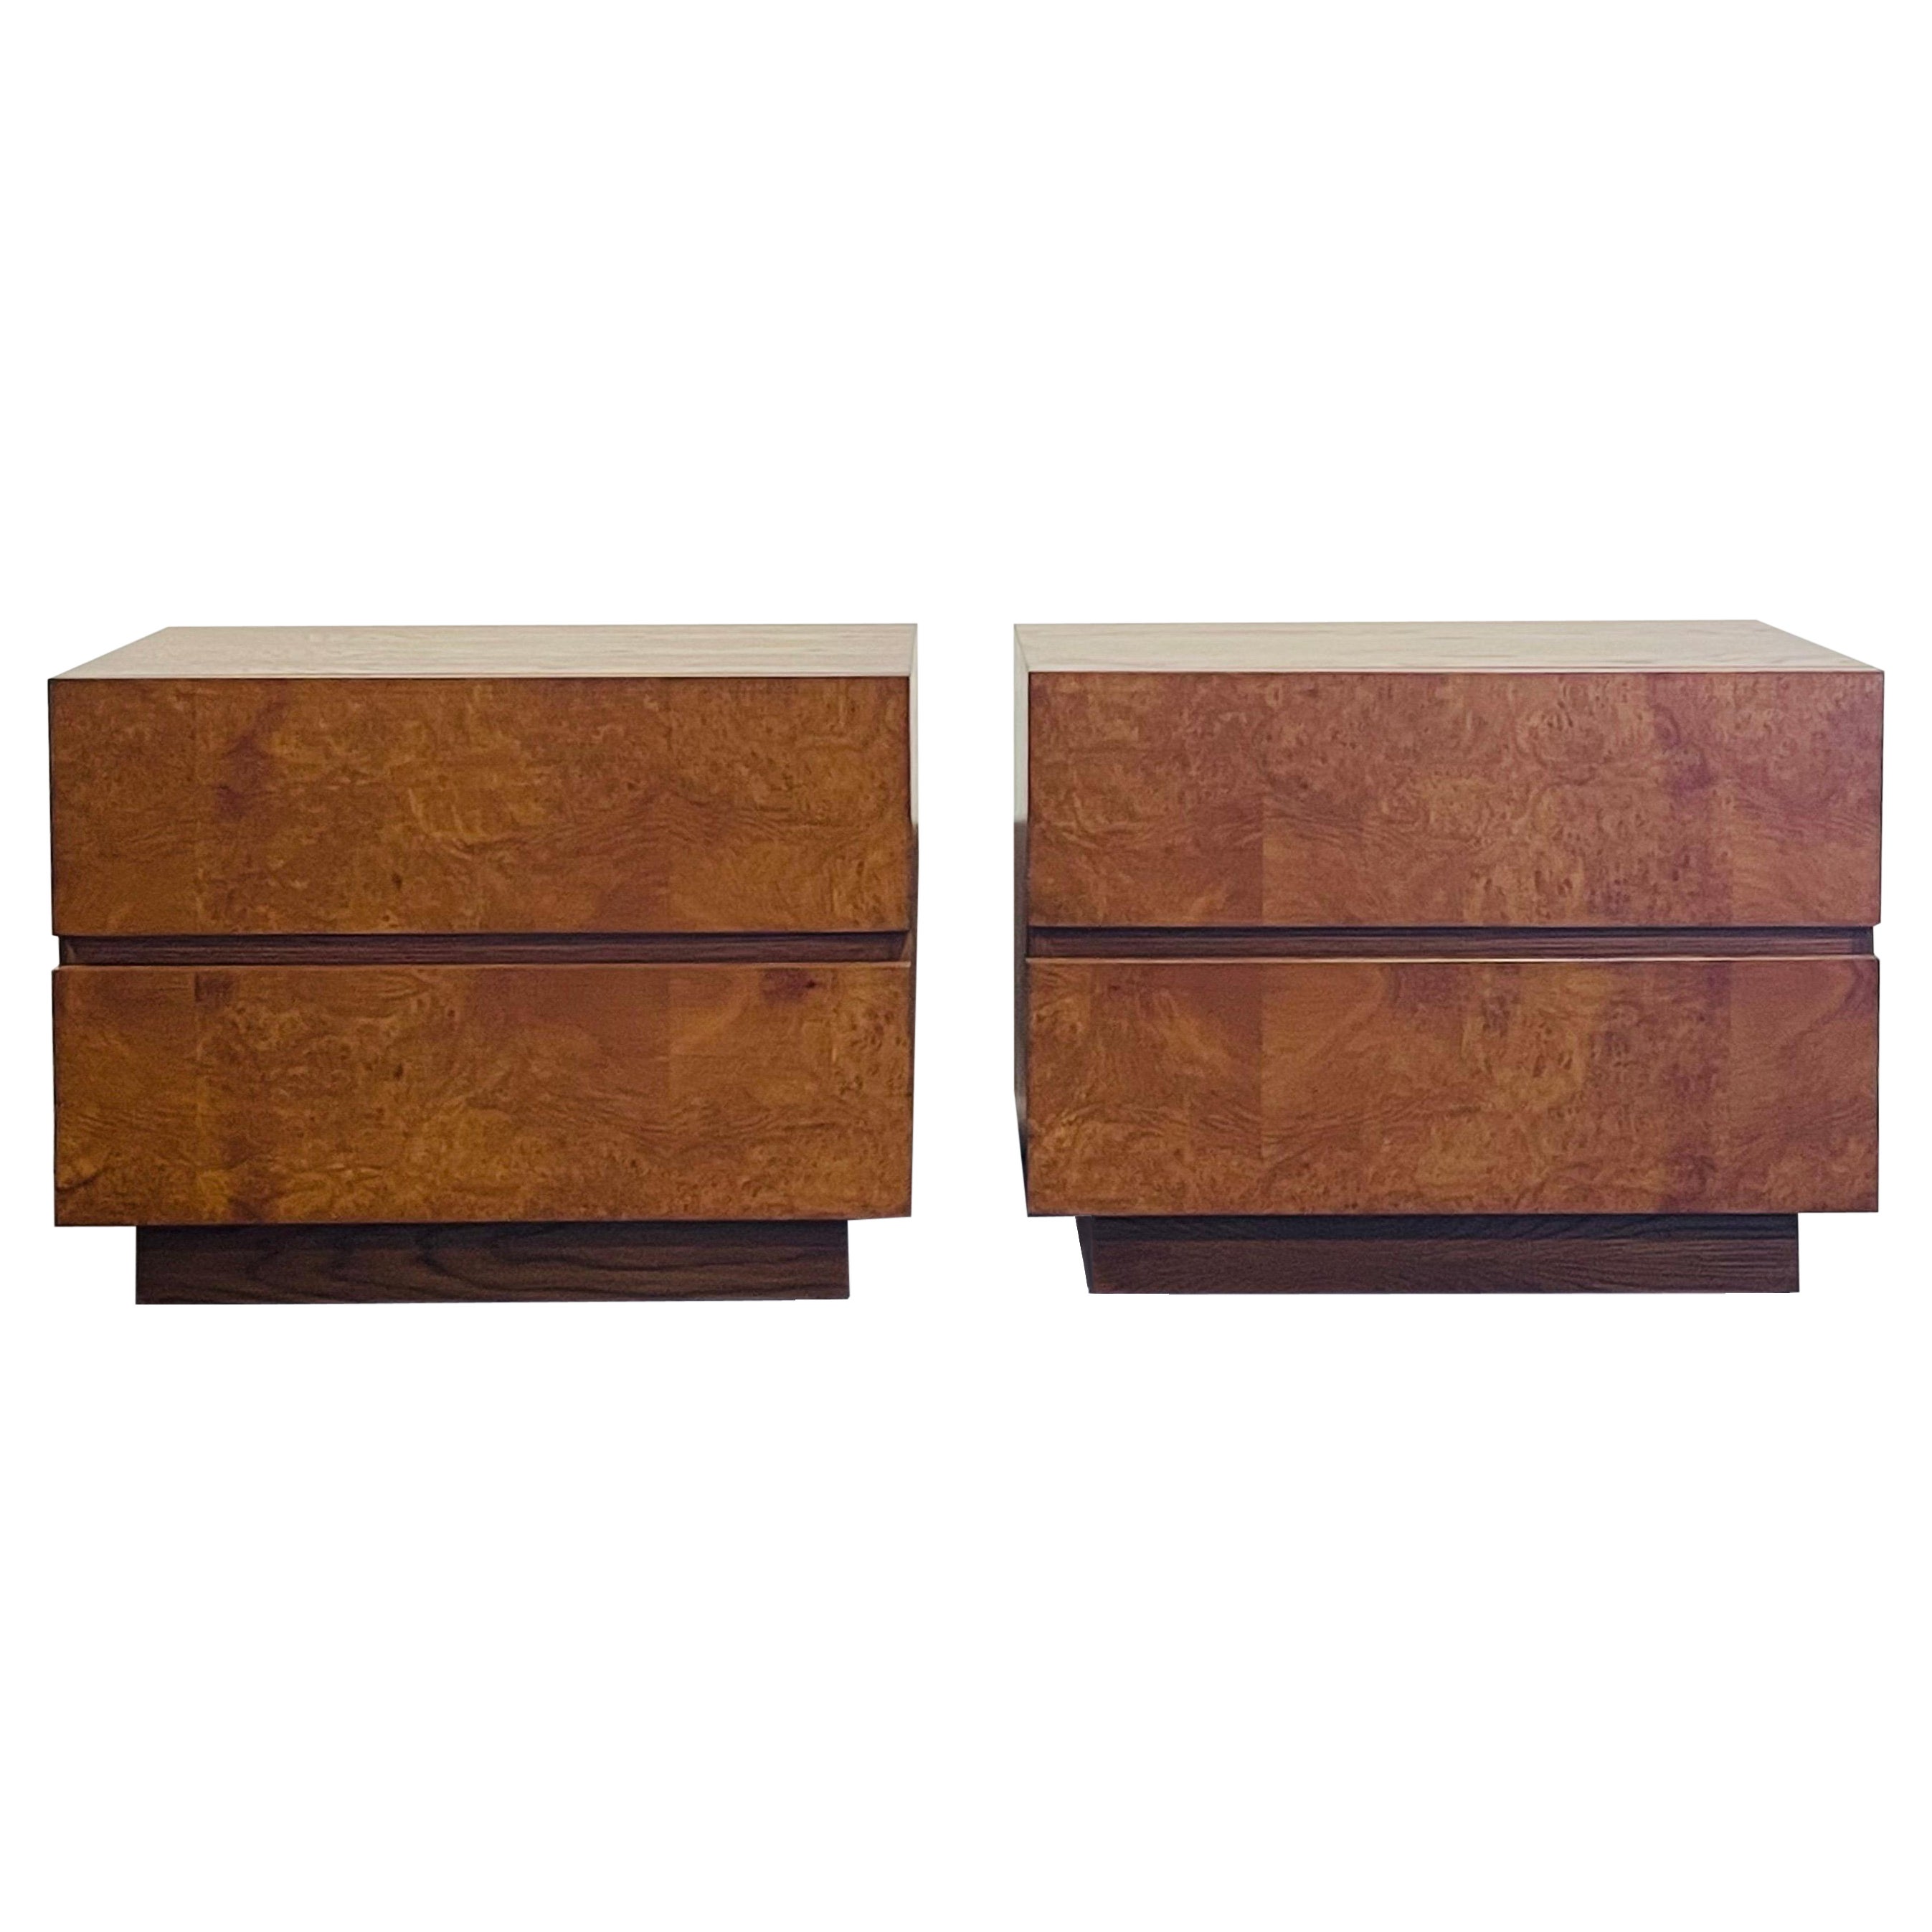 Pair of Minimalist 'Amboine' Burlwood Night Stands by Design Frères For Sale